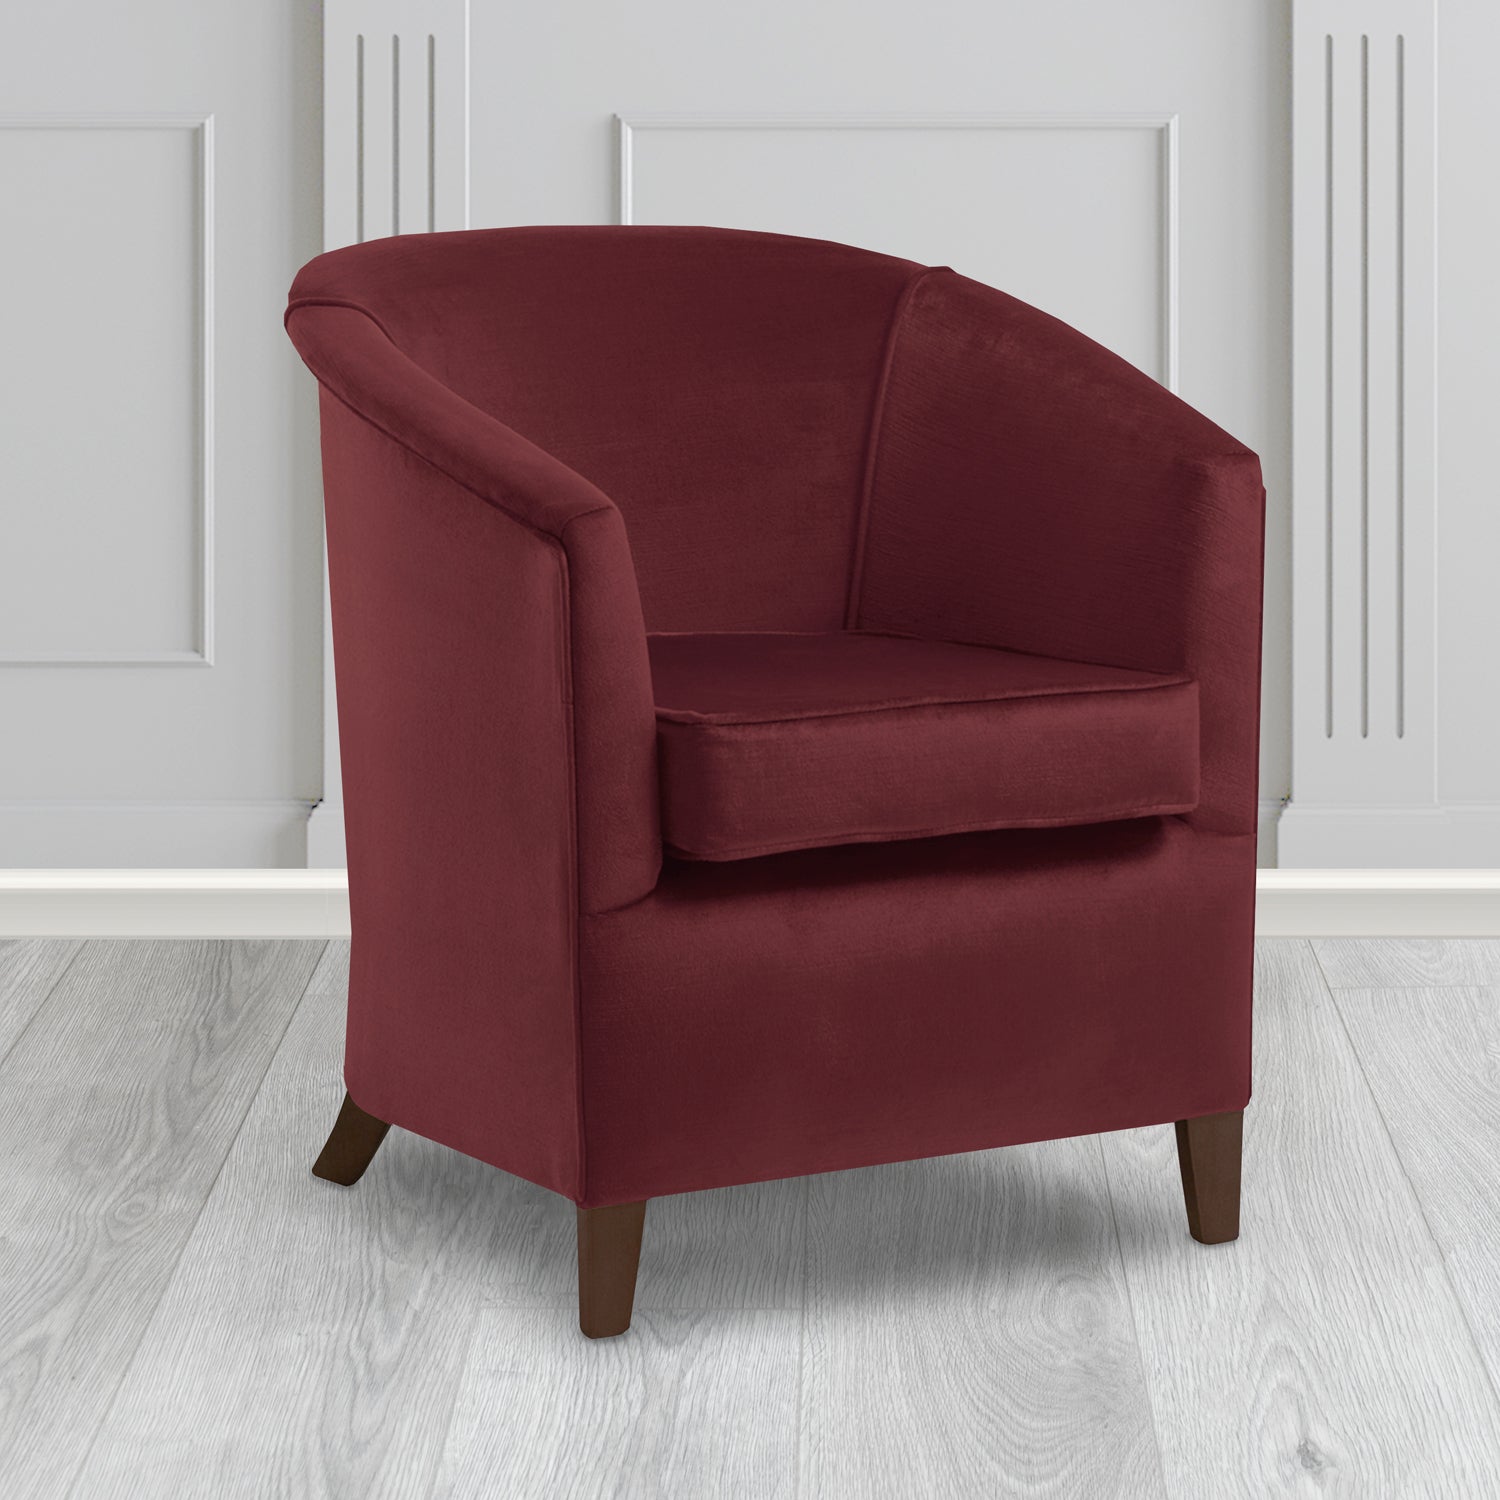 Jasmine Tub Chair in Noble 414 Wine Crib 5 Velvet Fabric - Water Resistant - The Tub Chair Shop